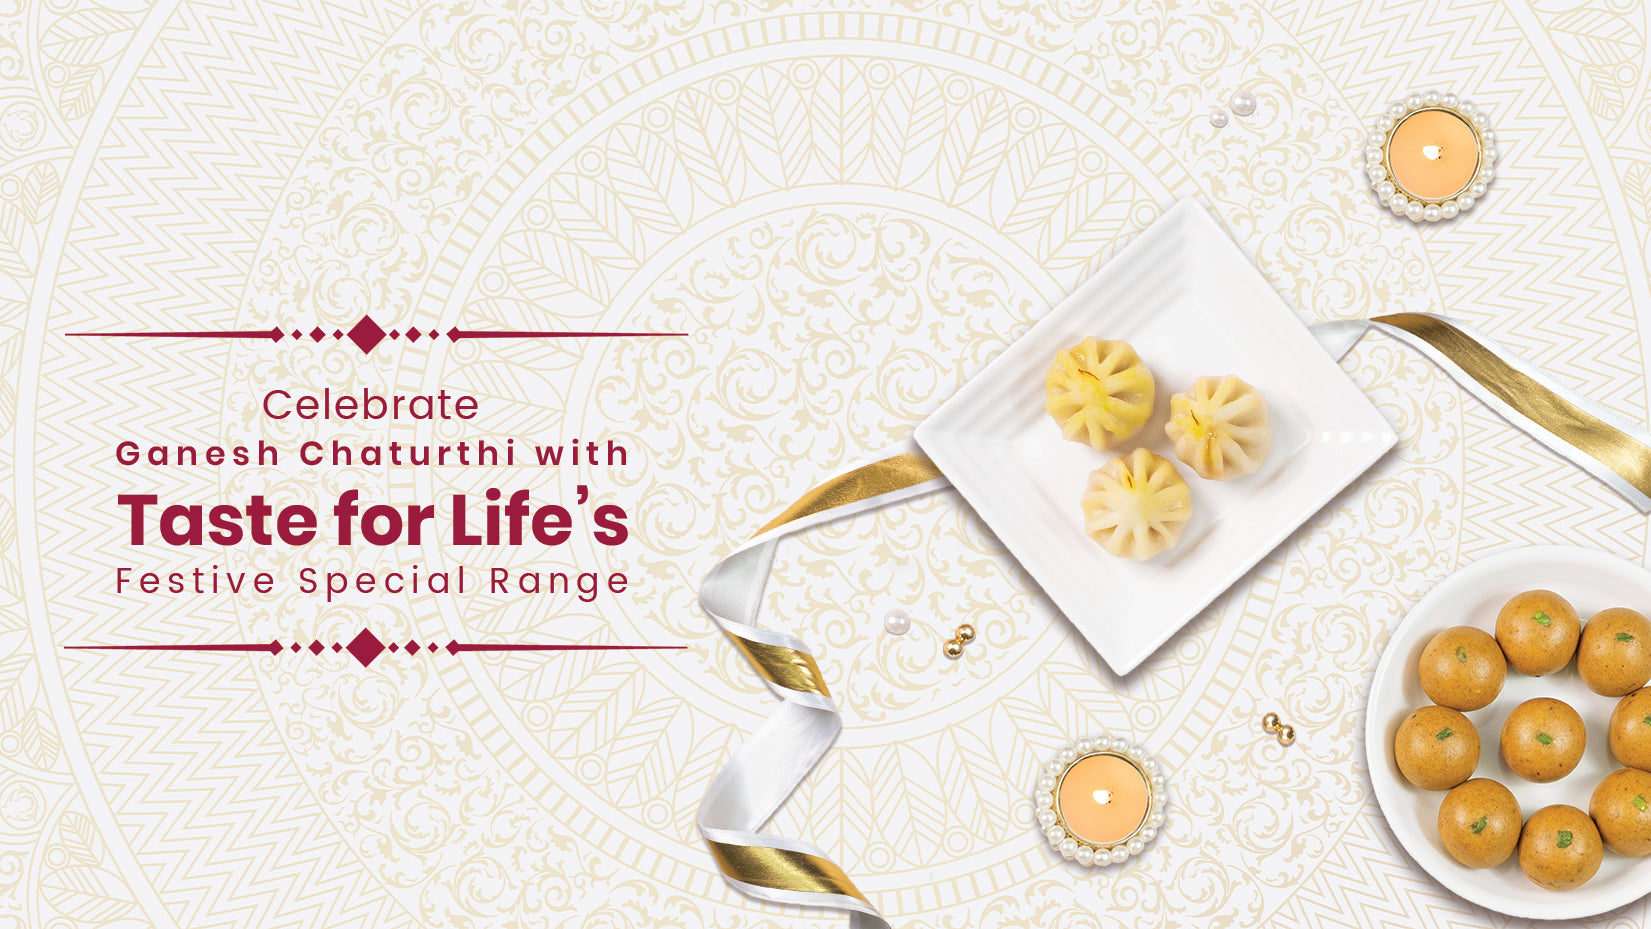 Celebrate Ganesh Chaturthi with Taste for Life’s Authentic and Convenient Festive Range